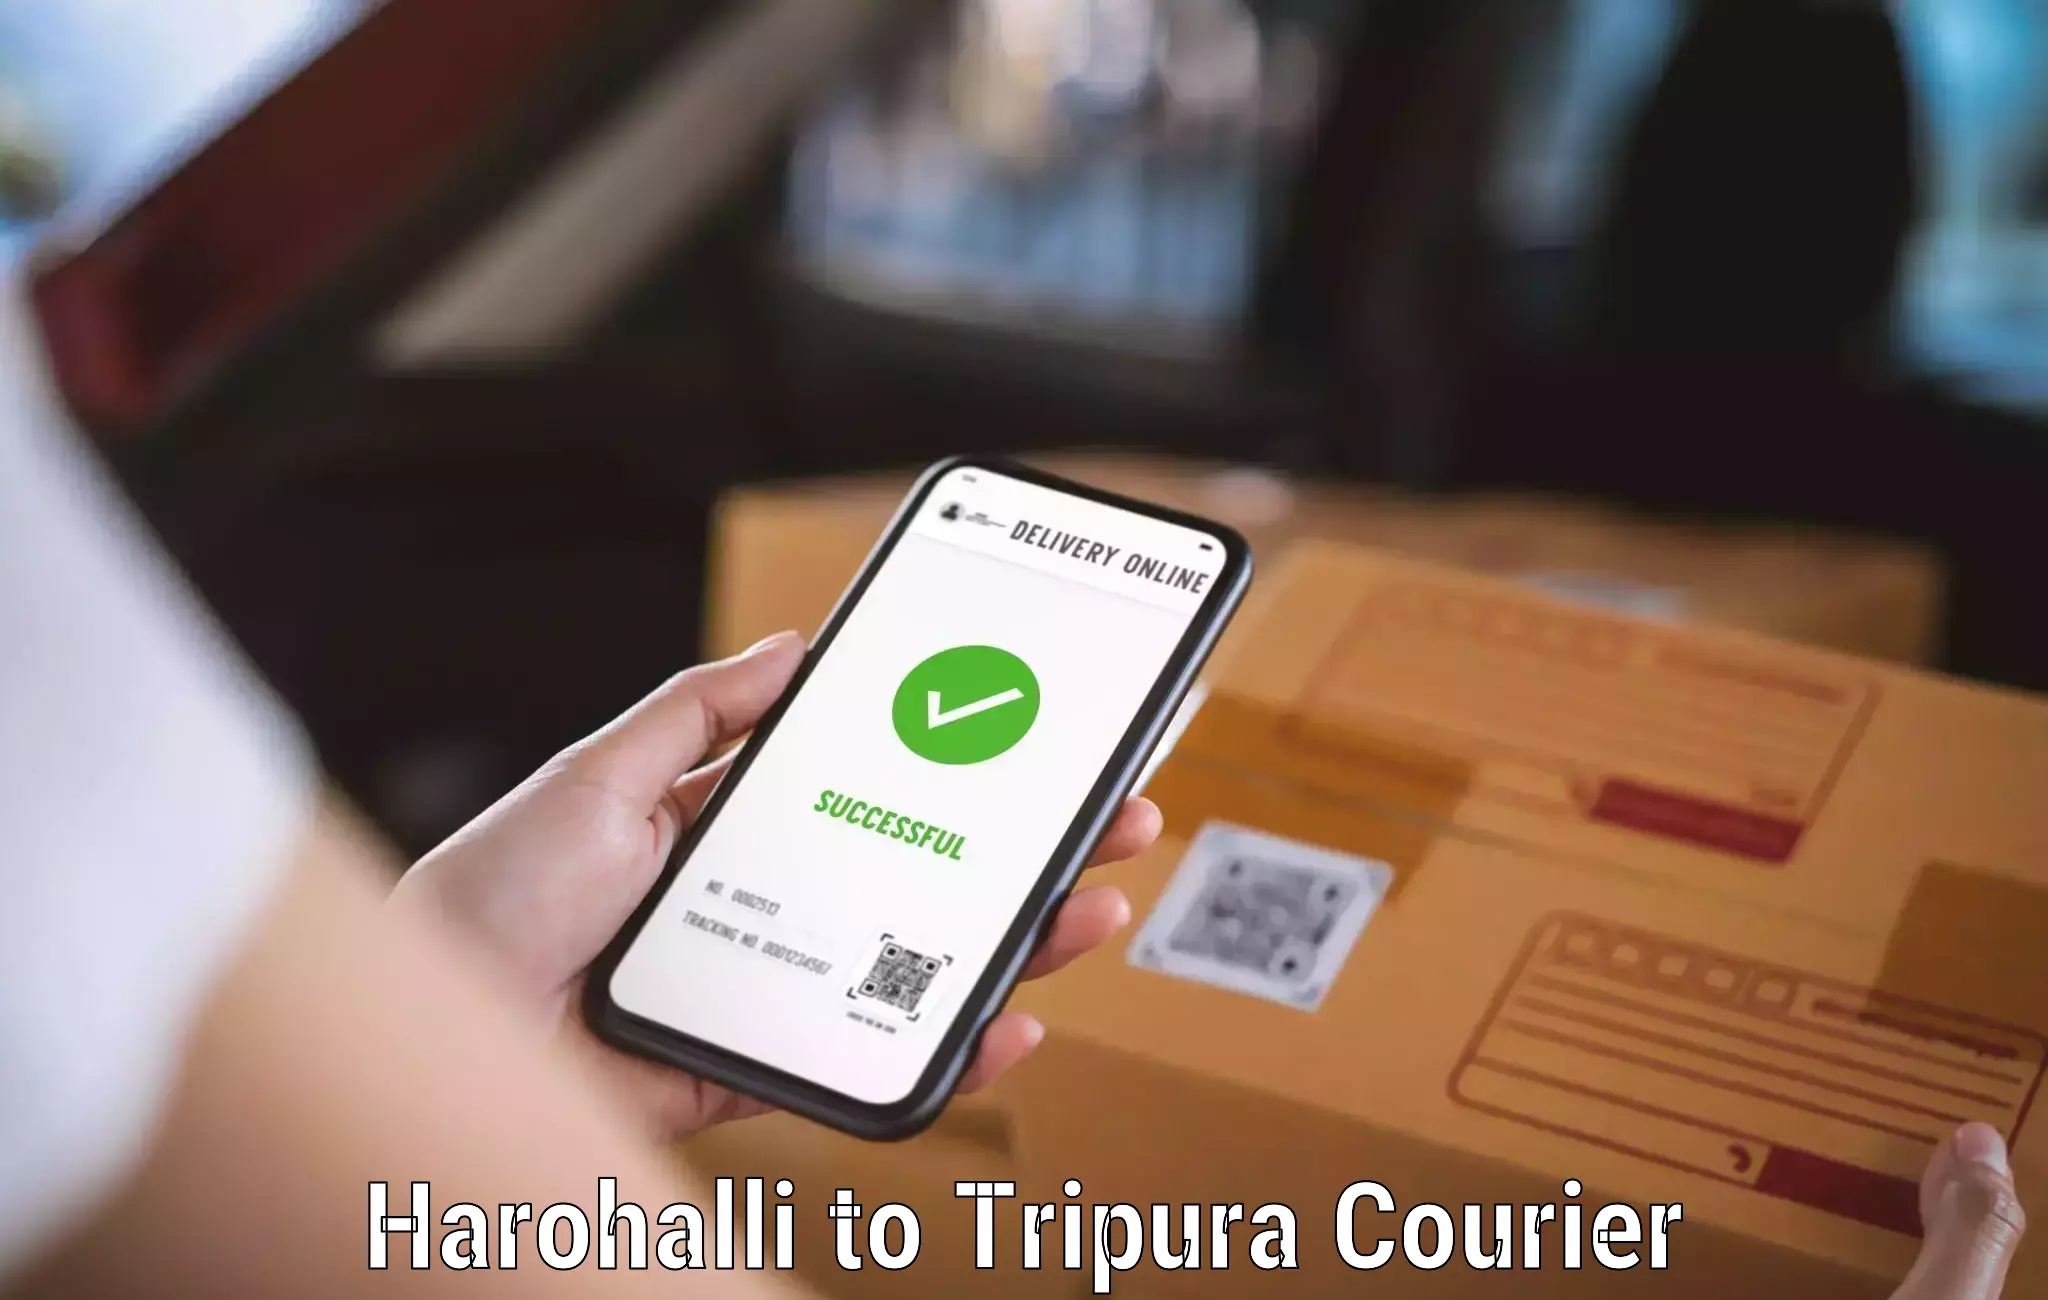 Air courier services Harohalli to Udaipur Tripura